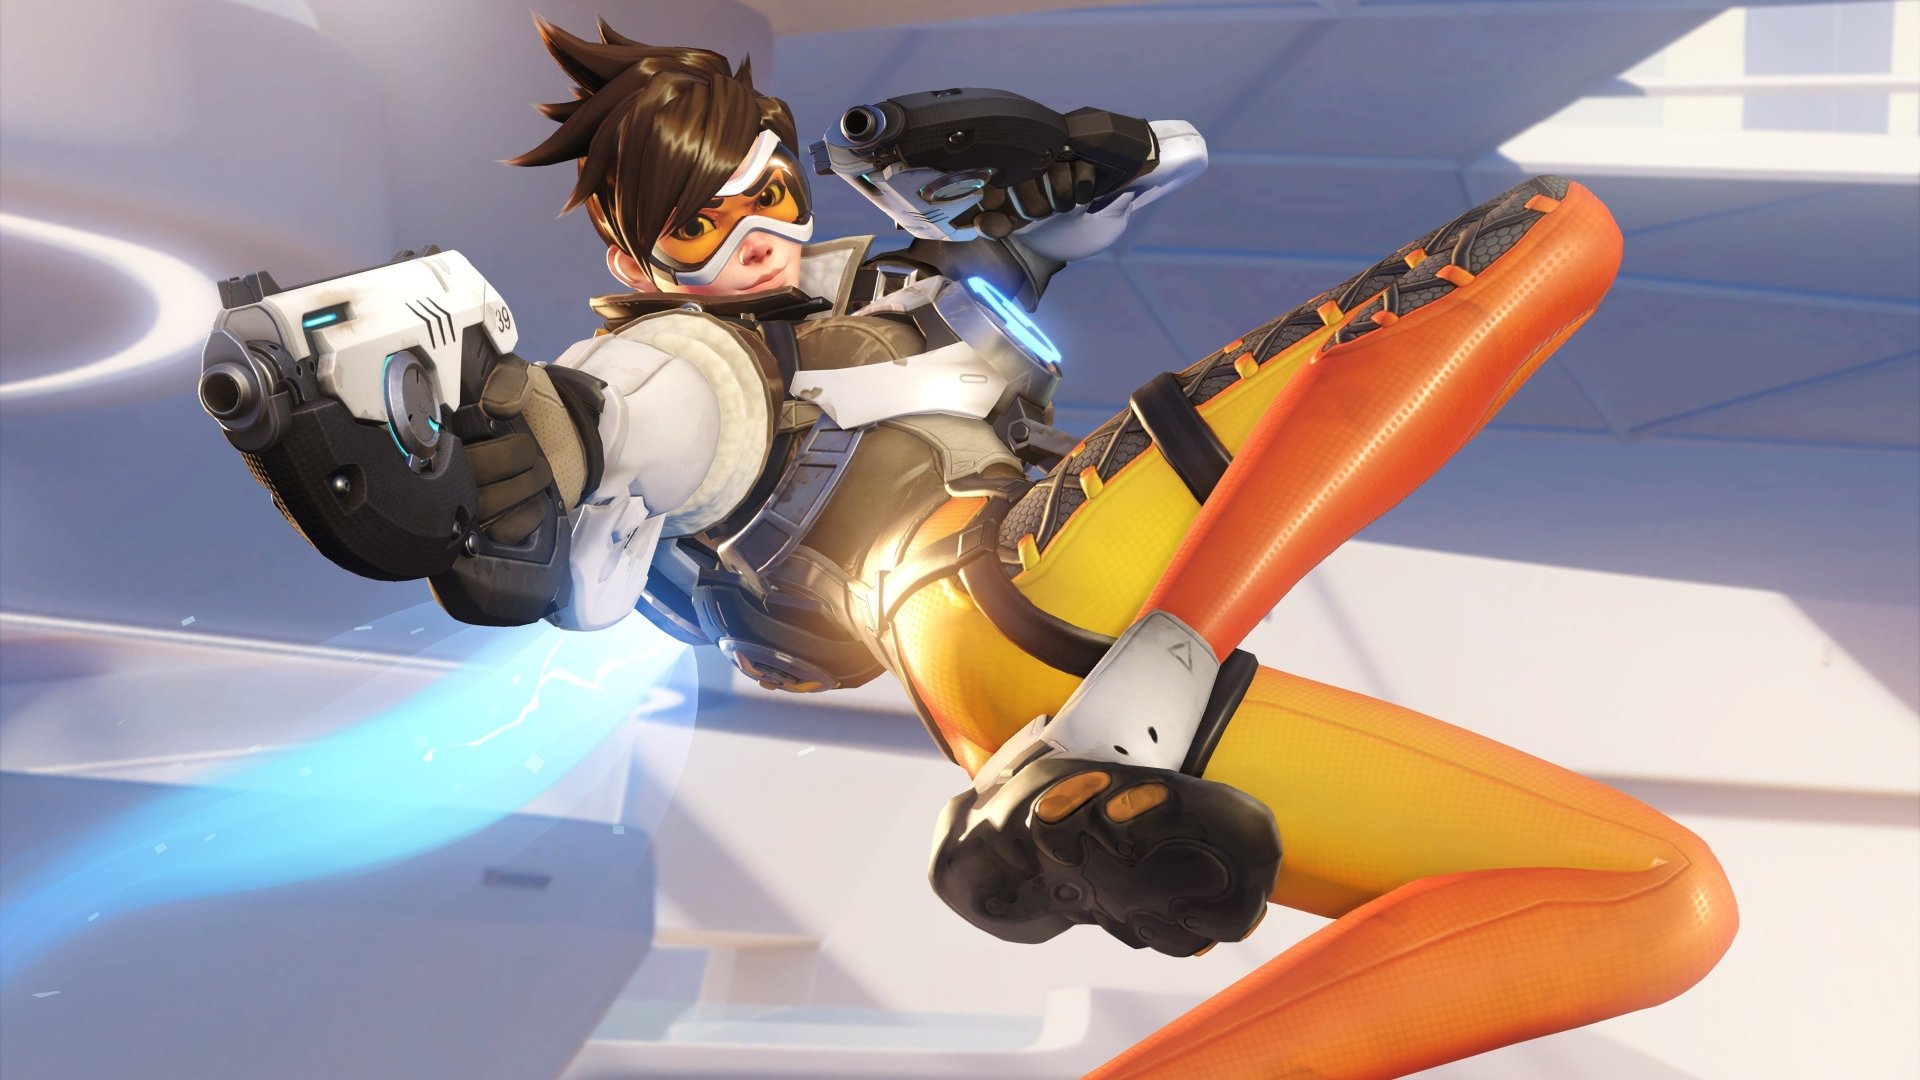 121 4k Ultra Hd Tracer Overwatch Wallpapers Background Images Wallpaper Abyss Here are only the best overwatch 4k wallpapers. 121 4k ultra hd tracer overwatch